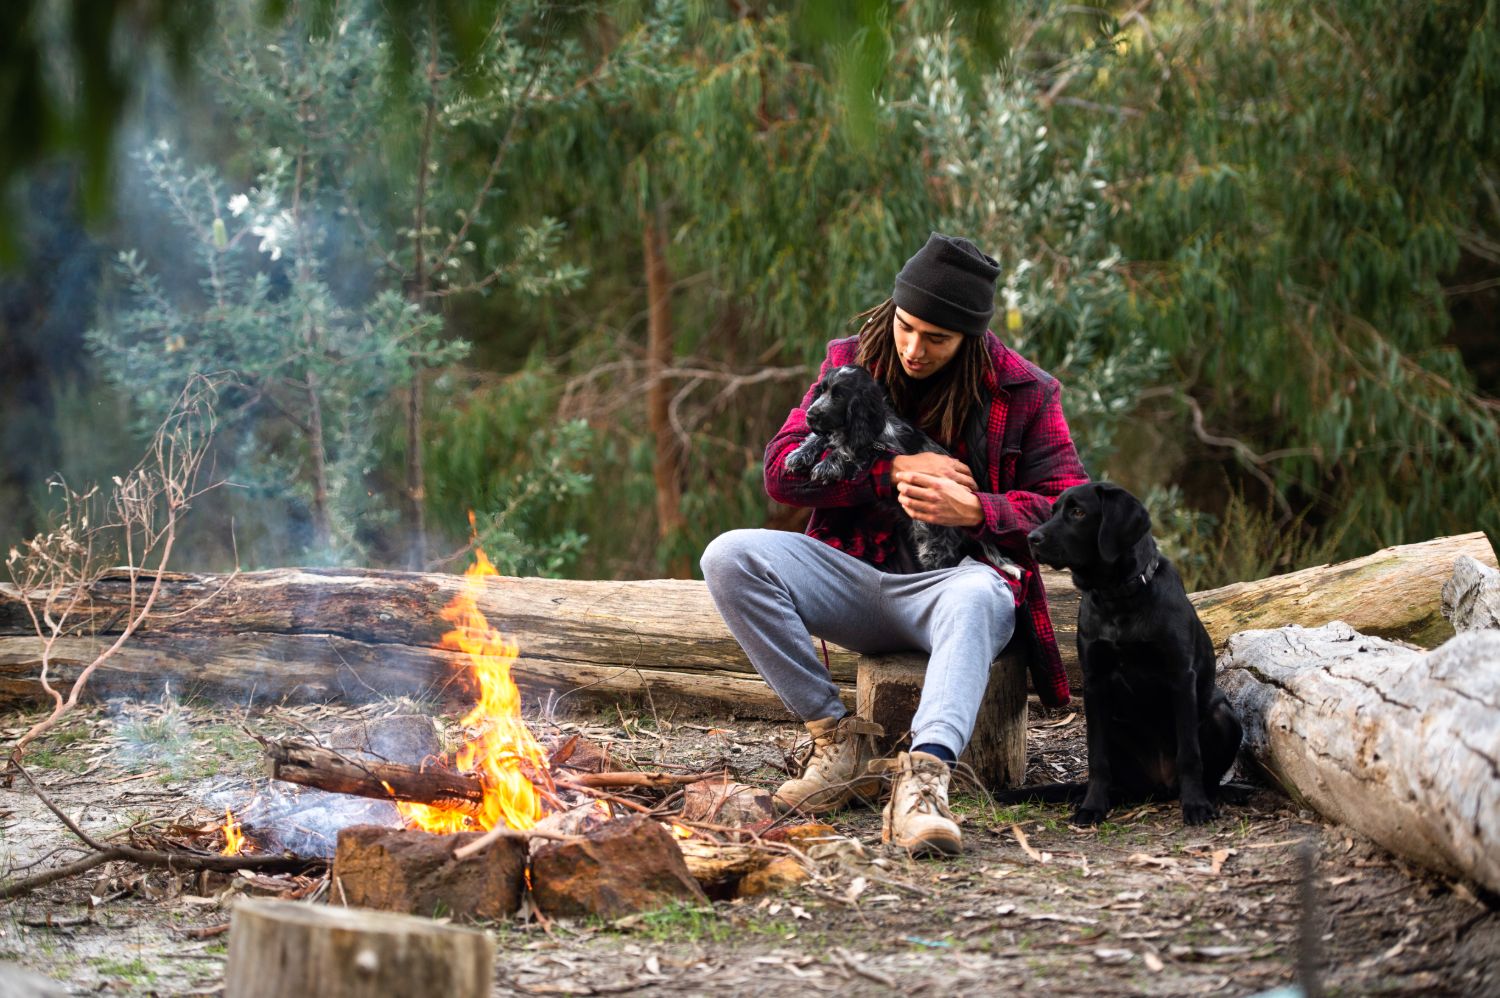 Man sits hugging his dog in the bush, by a burning fire